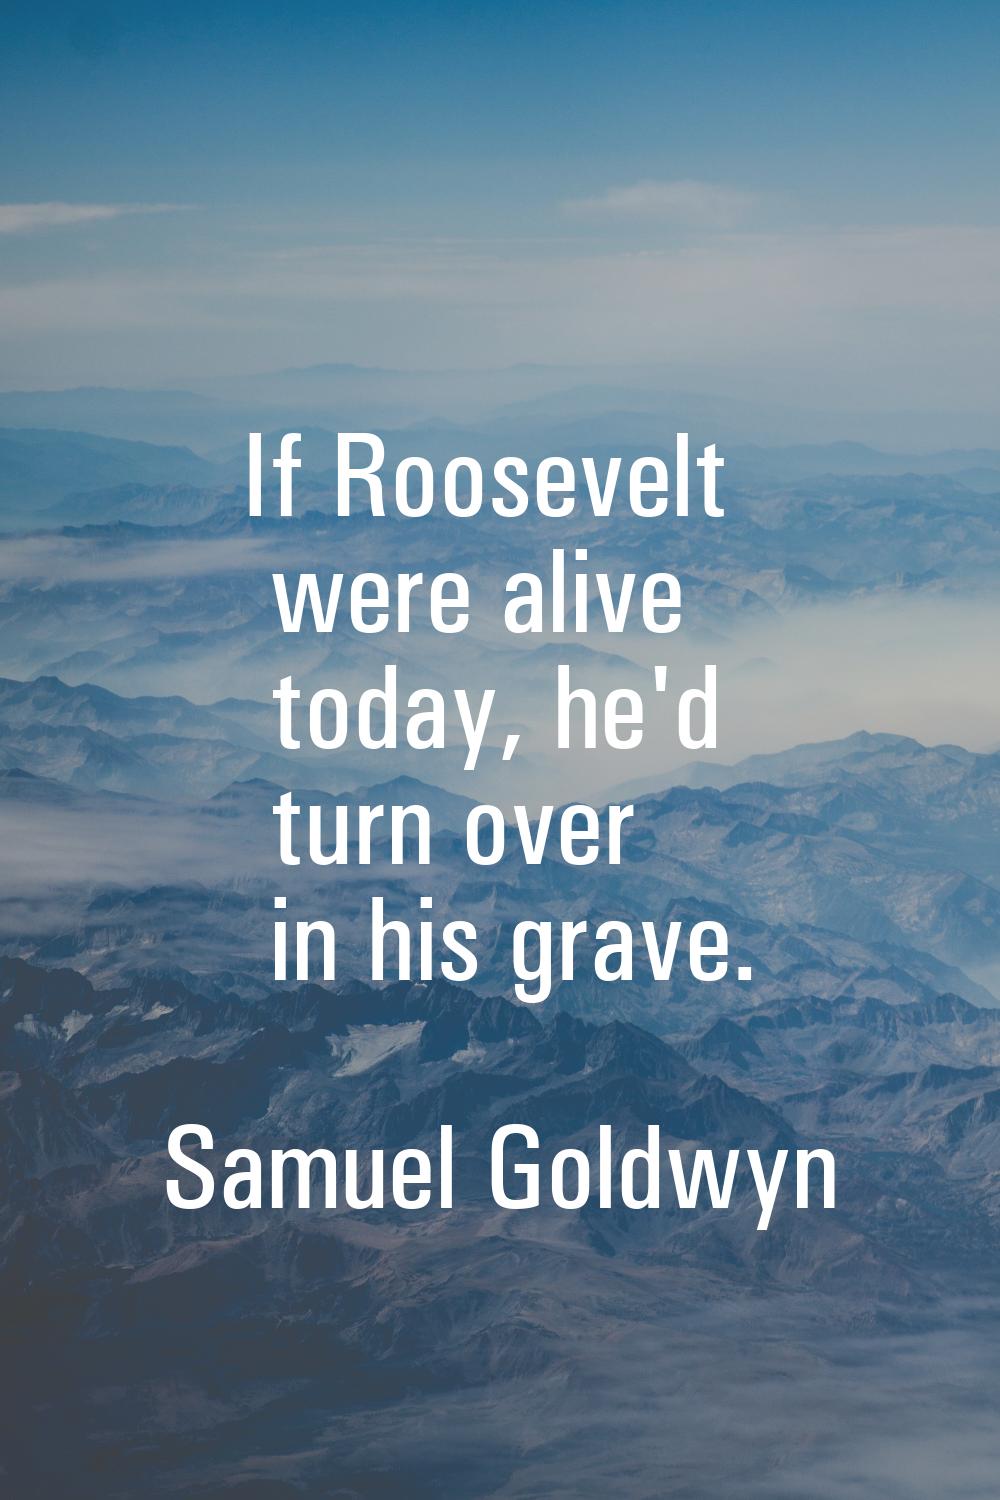 If Roosevelt were alive today, he'd turn over in his grave.